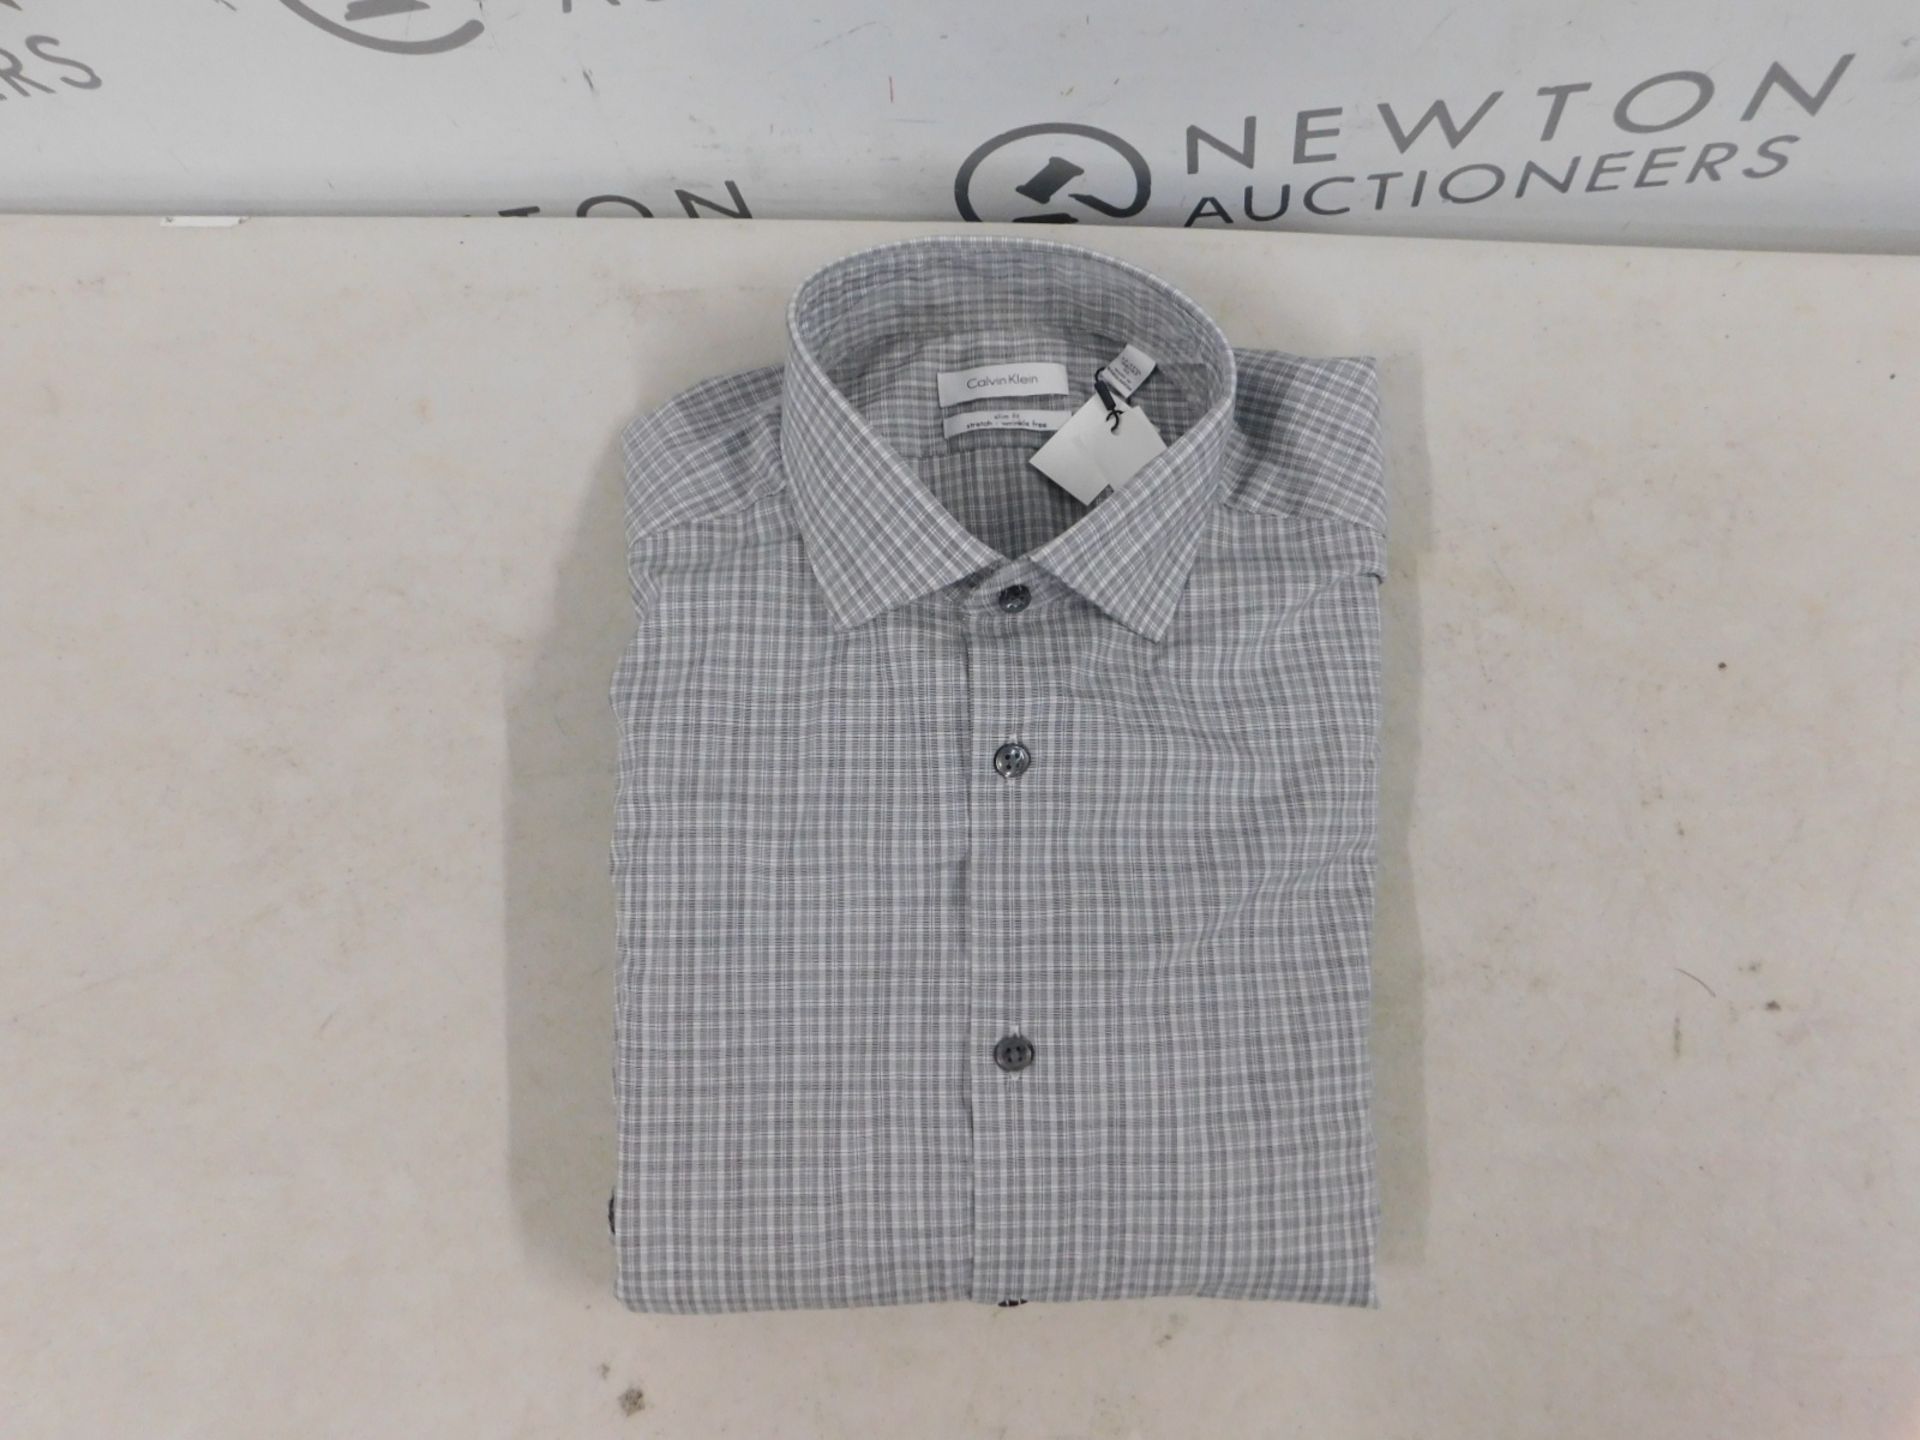 1 CALVIN KLEIN MENS SLIM FIT DRESS SHIRT STRETCH WRINKLE FREE IN LIGHT GRAY CHECKERED COLOUR SIZE XL